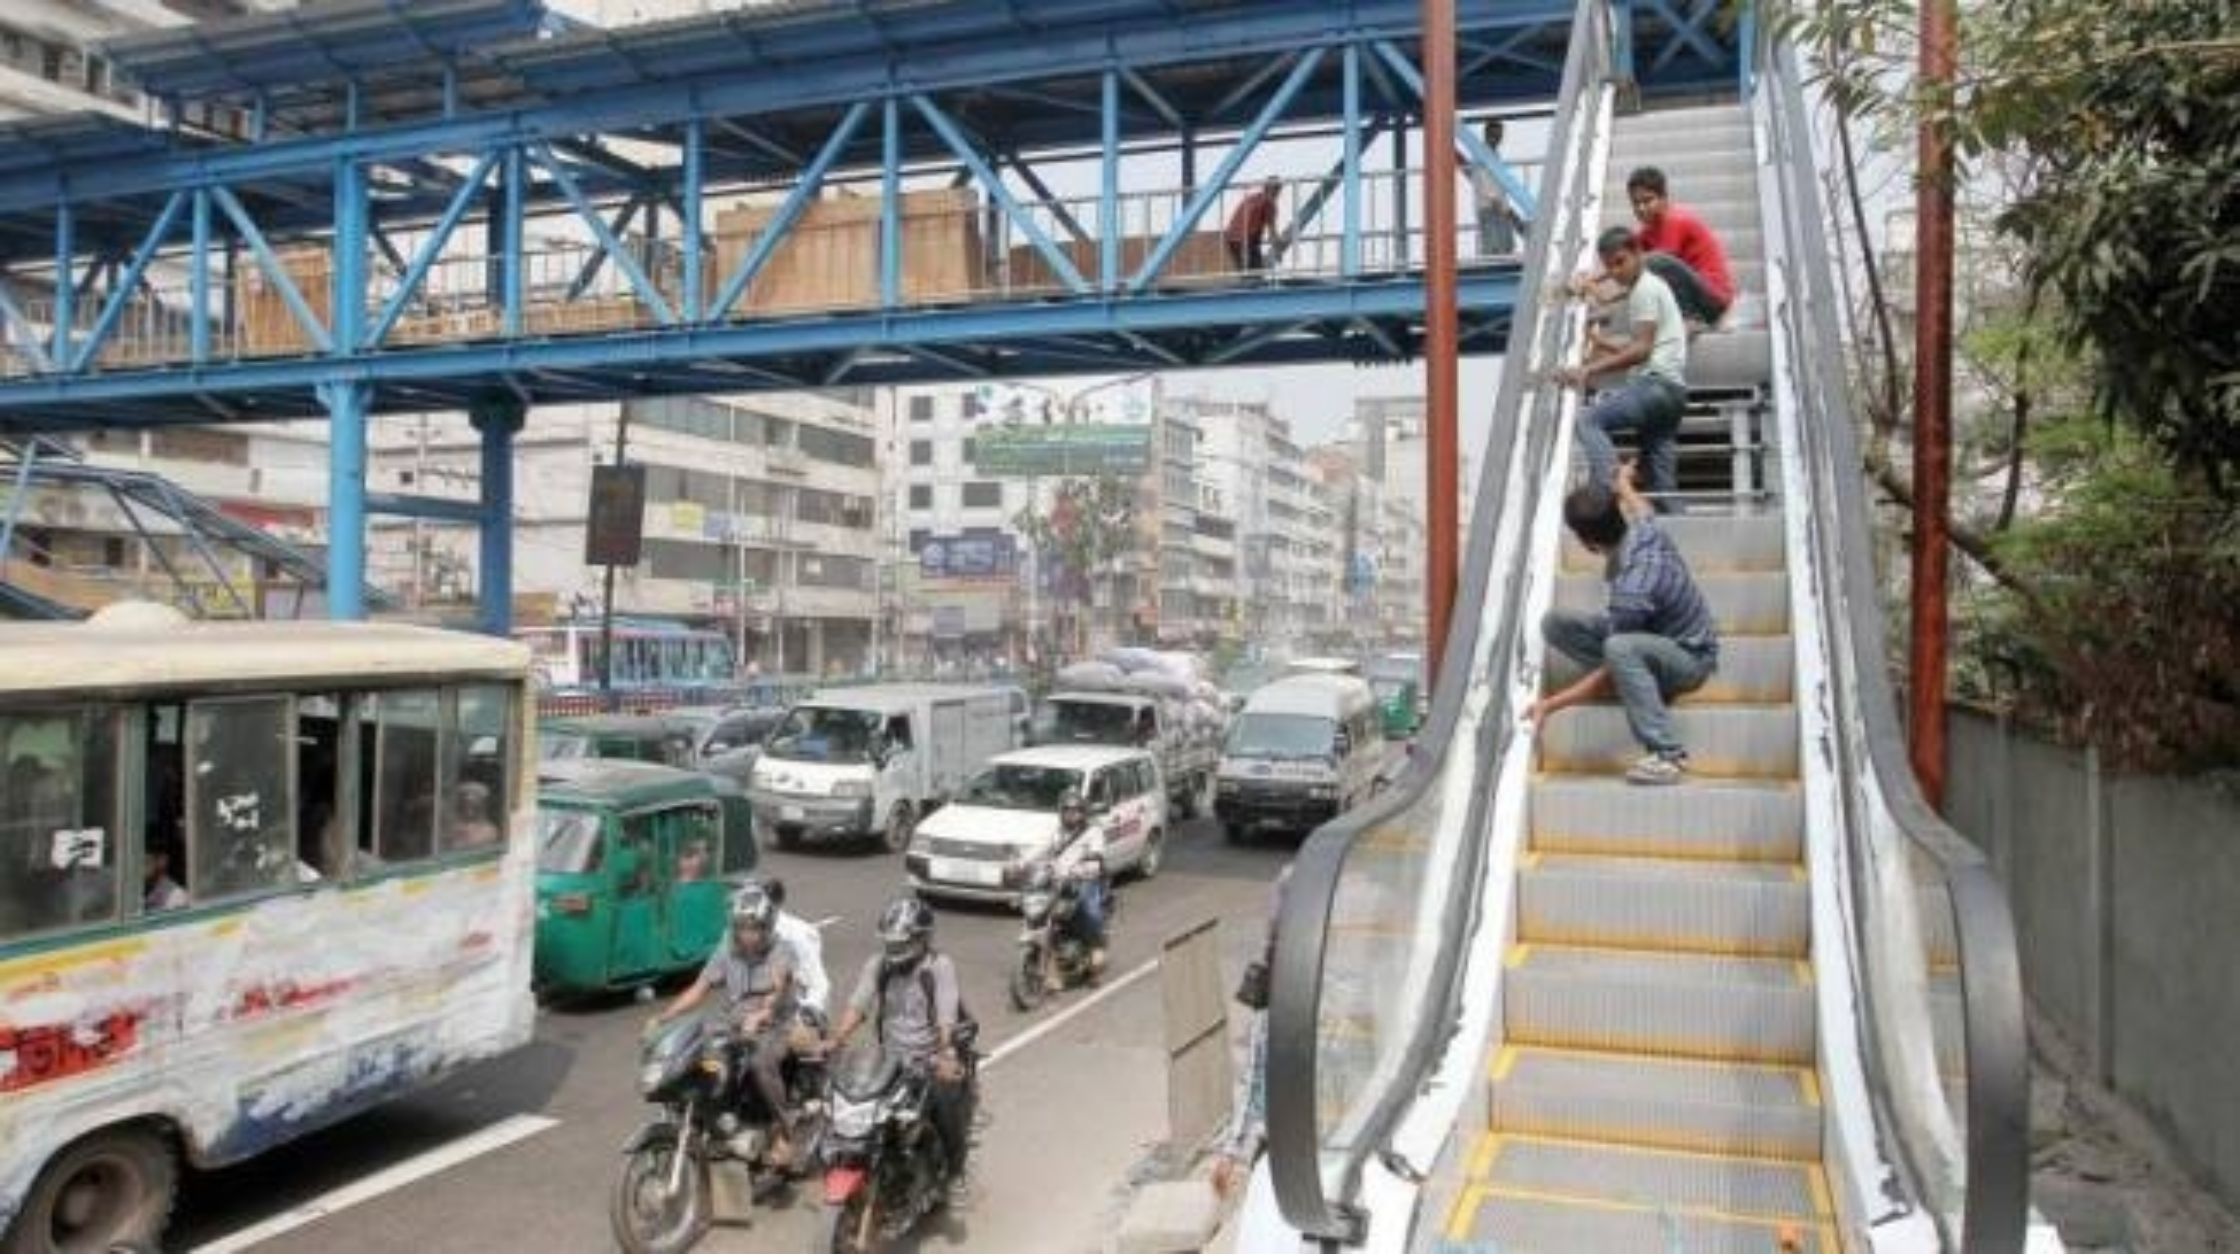 Such foot overbridge construction being done for the first time in Bihar